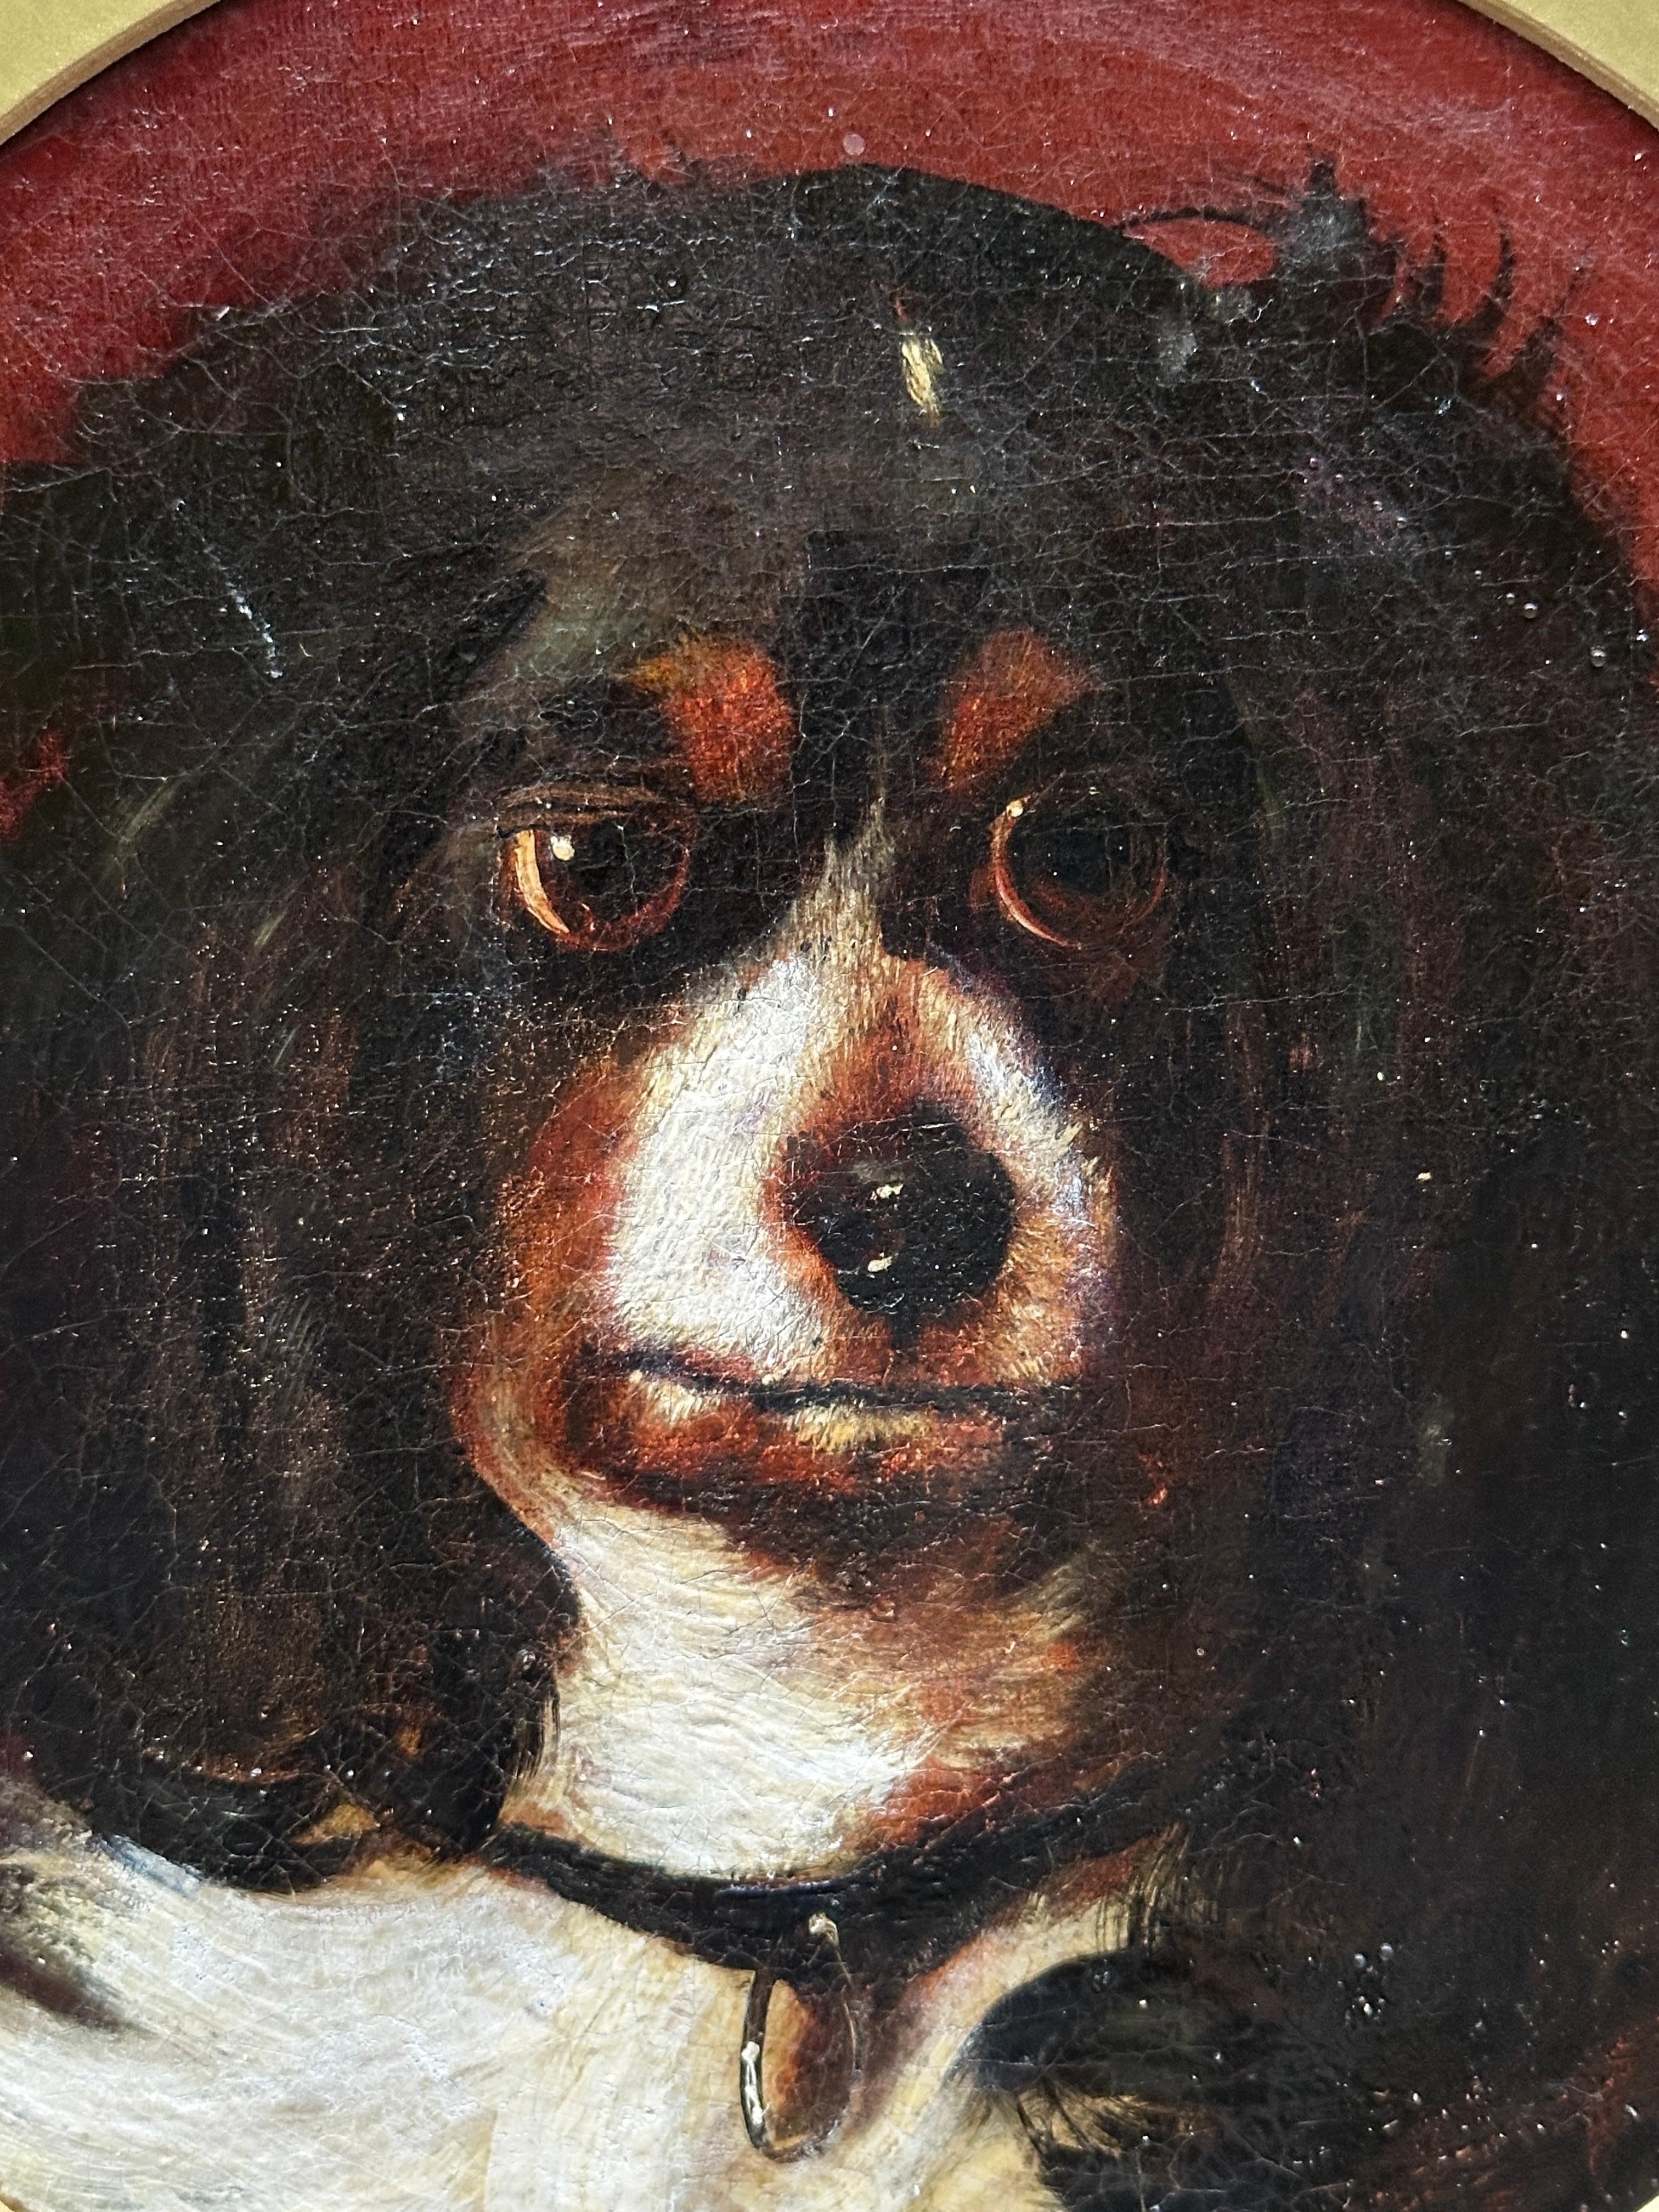 King Charles Cavalier Spaniel, 19th century English portrait of a dogs head - Victorian Painting by George Earl